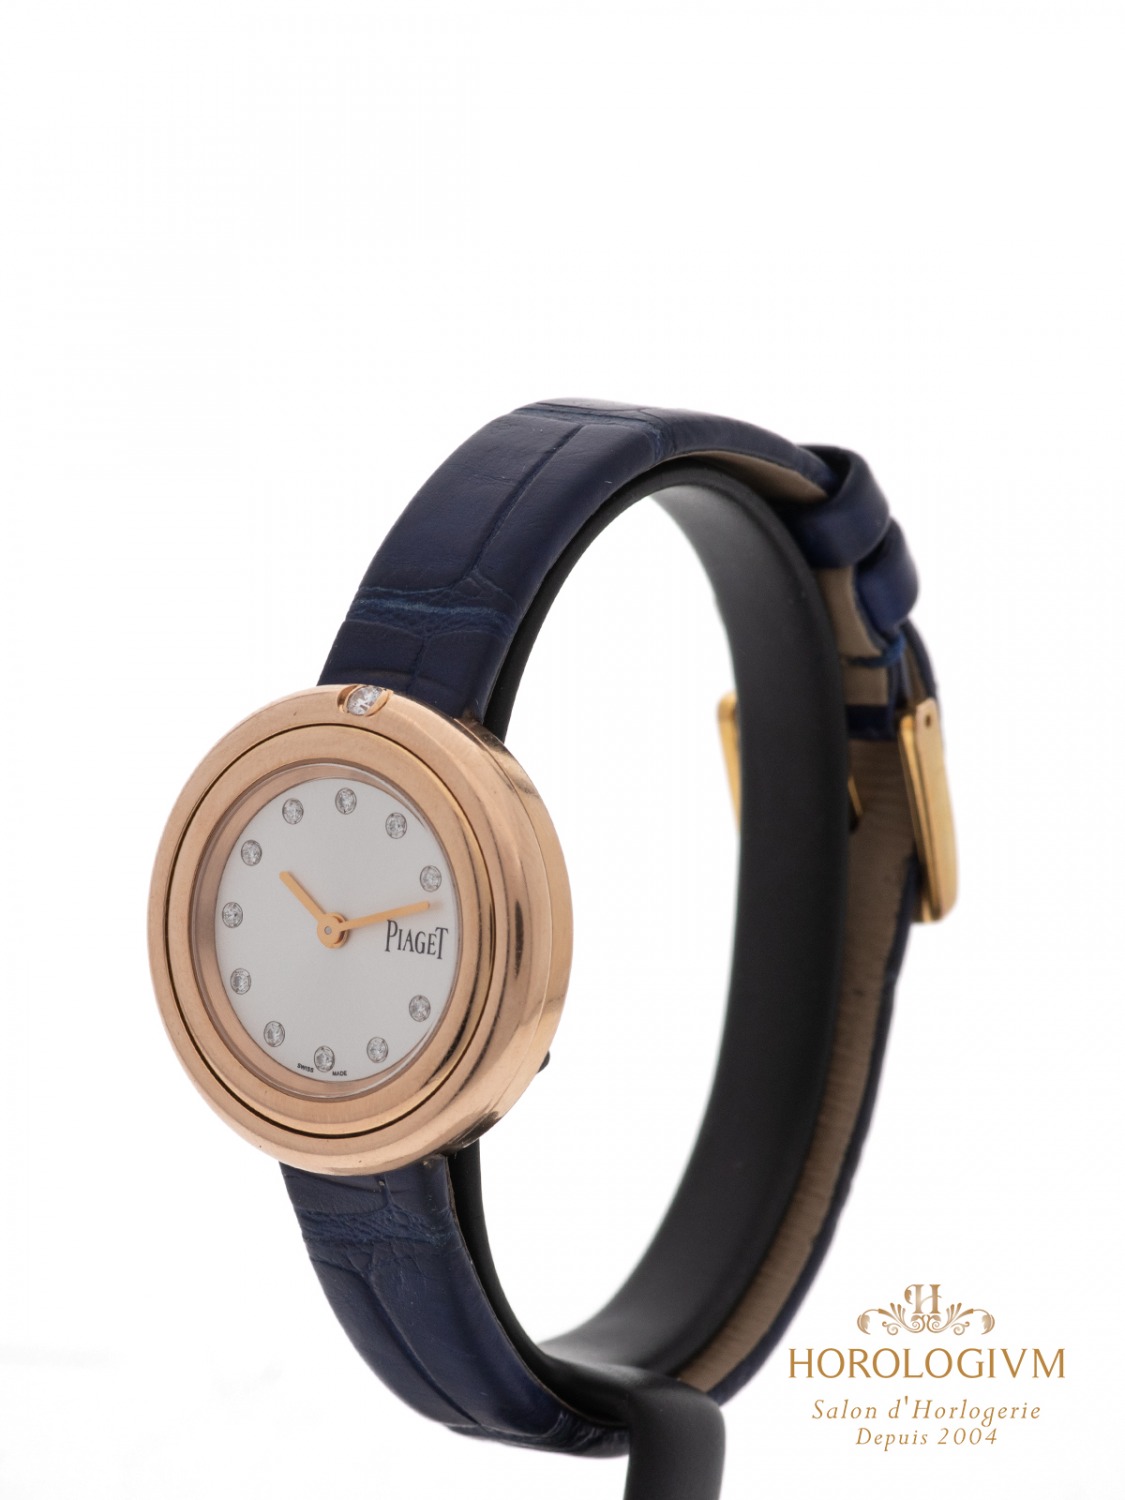 Piaget Possession 29MM watch, rose gold